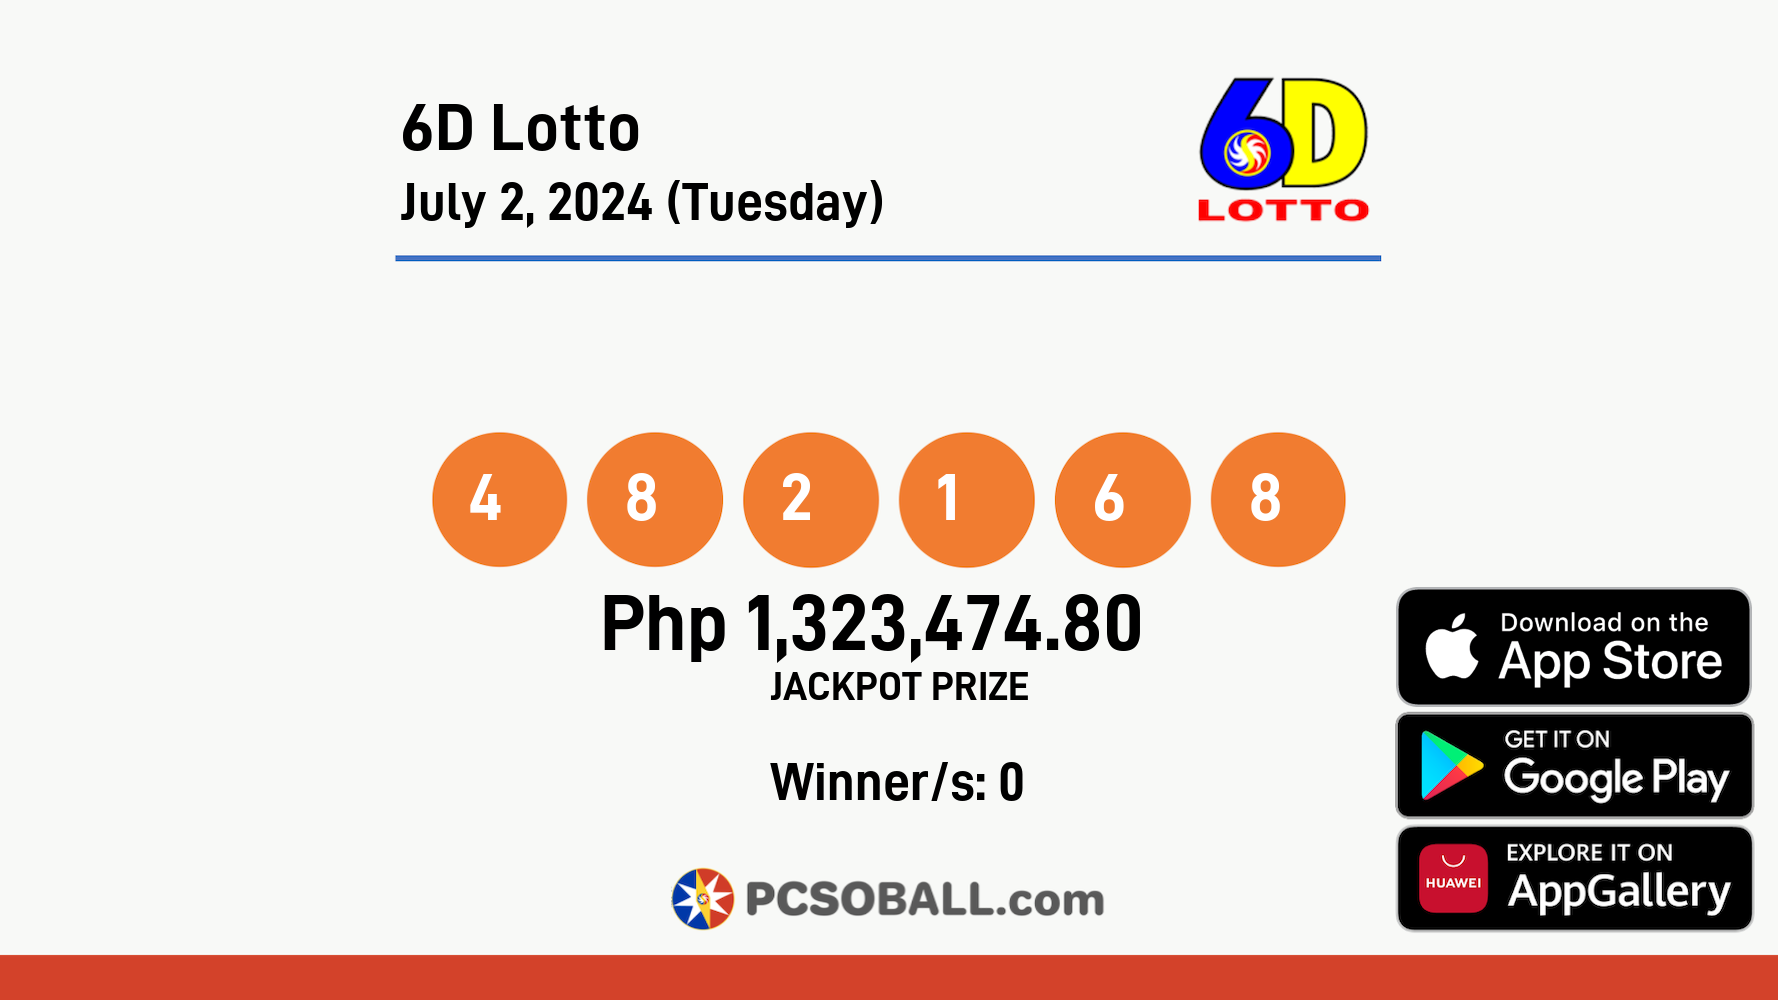 6D Lotto July 2, 2024 (Tuesday) Result